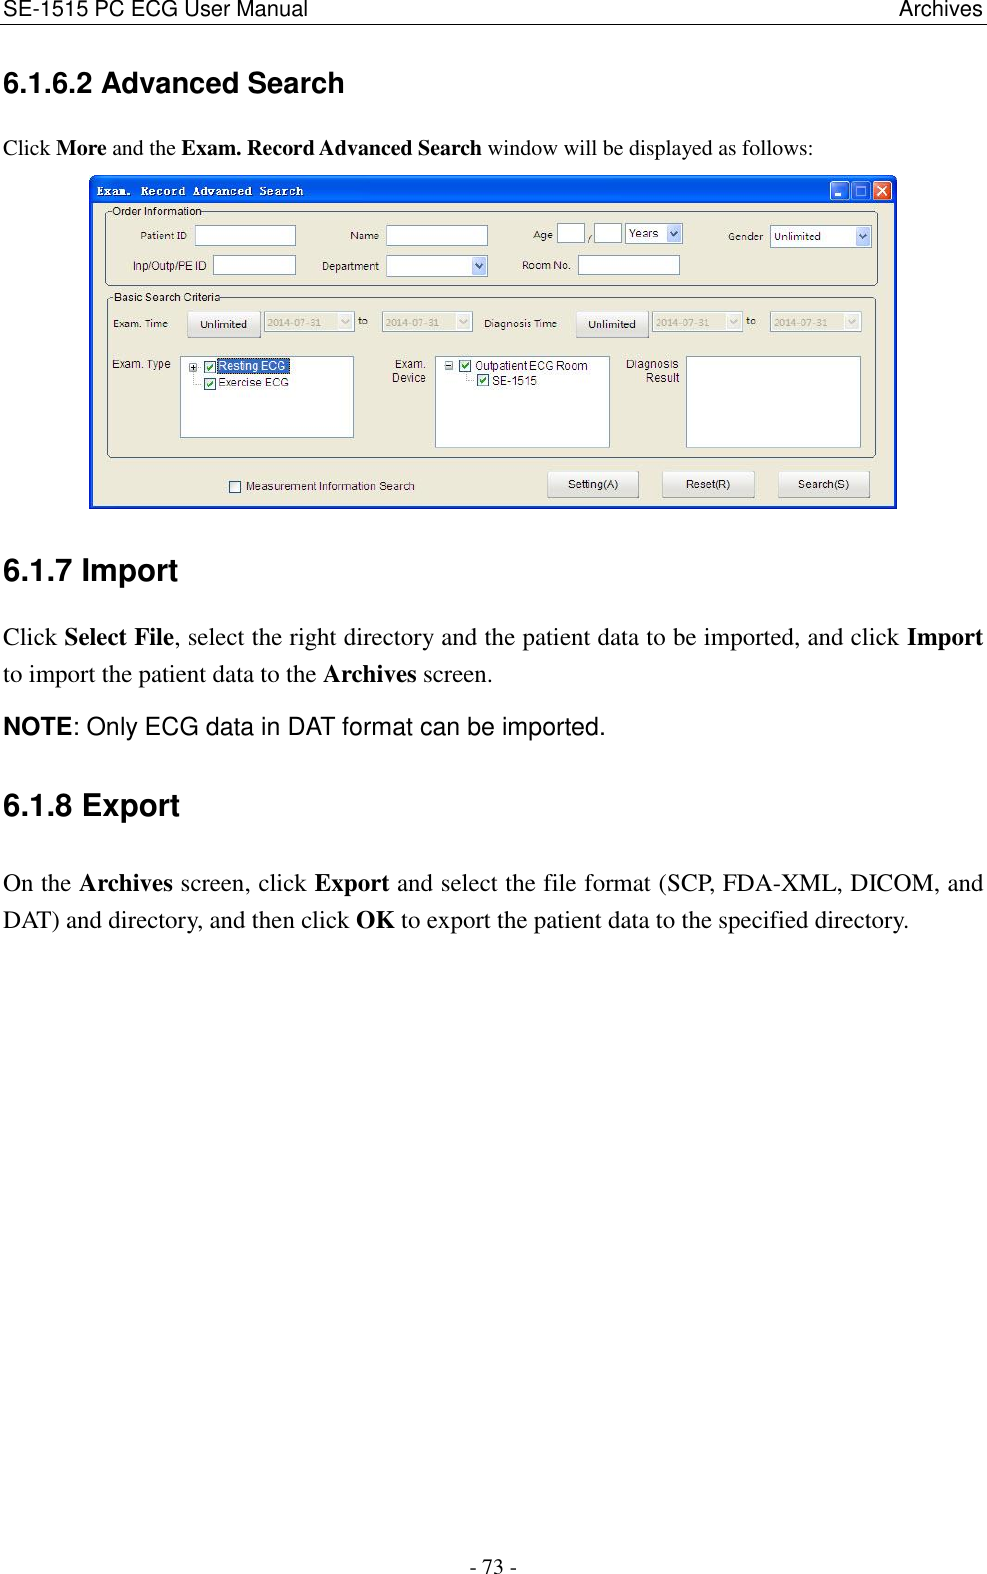 SE-1515 PC ECG User Manual                                                                                                            Archives - 73 - 6.1.6.2 Advanced Search Click More and the Exam. Record Advanced Search window will be displayed as follows:  6.1.7 Import Click Select File, select the right directory and the patient data to be imported, and click Import to import the patient data to the Archives screen. NOTE: Only ECG data in DAT format can be imported. 6.1.8 Export On the Archives screen, click Export and select the file format (SCP, FDA-XML, DICOM, and DAT) and directory, and then click OK to export the patient data to the specified directory.  